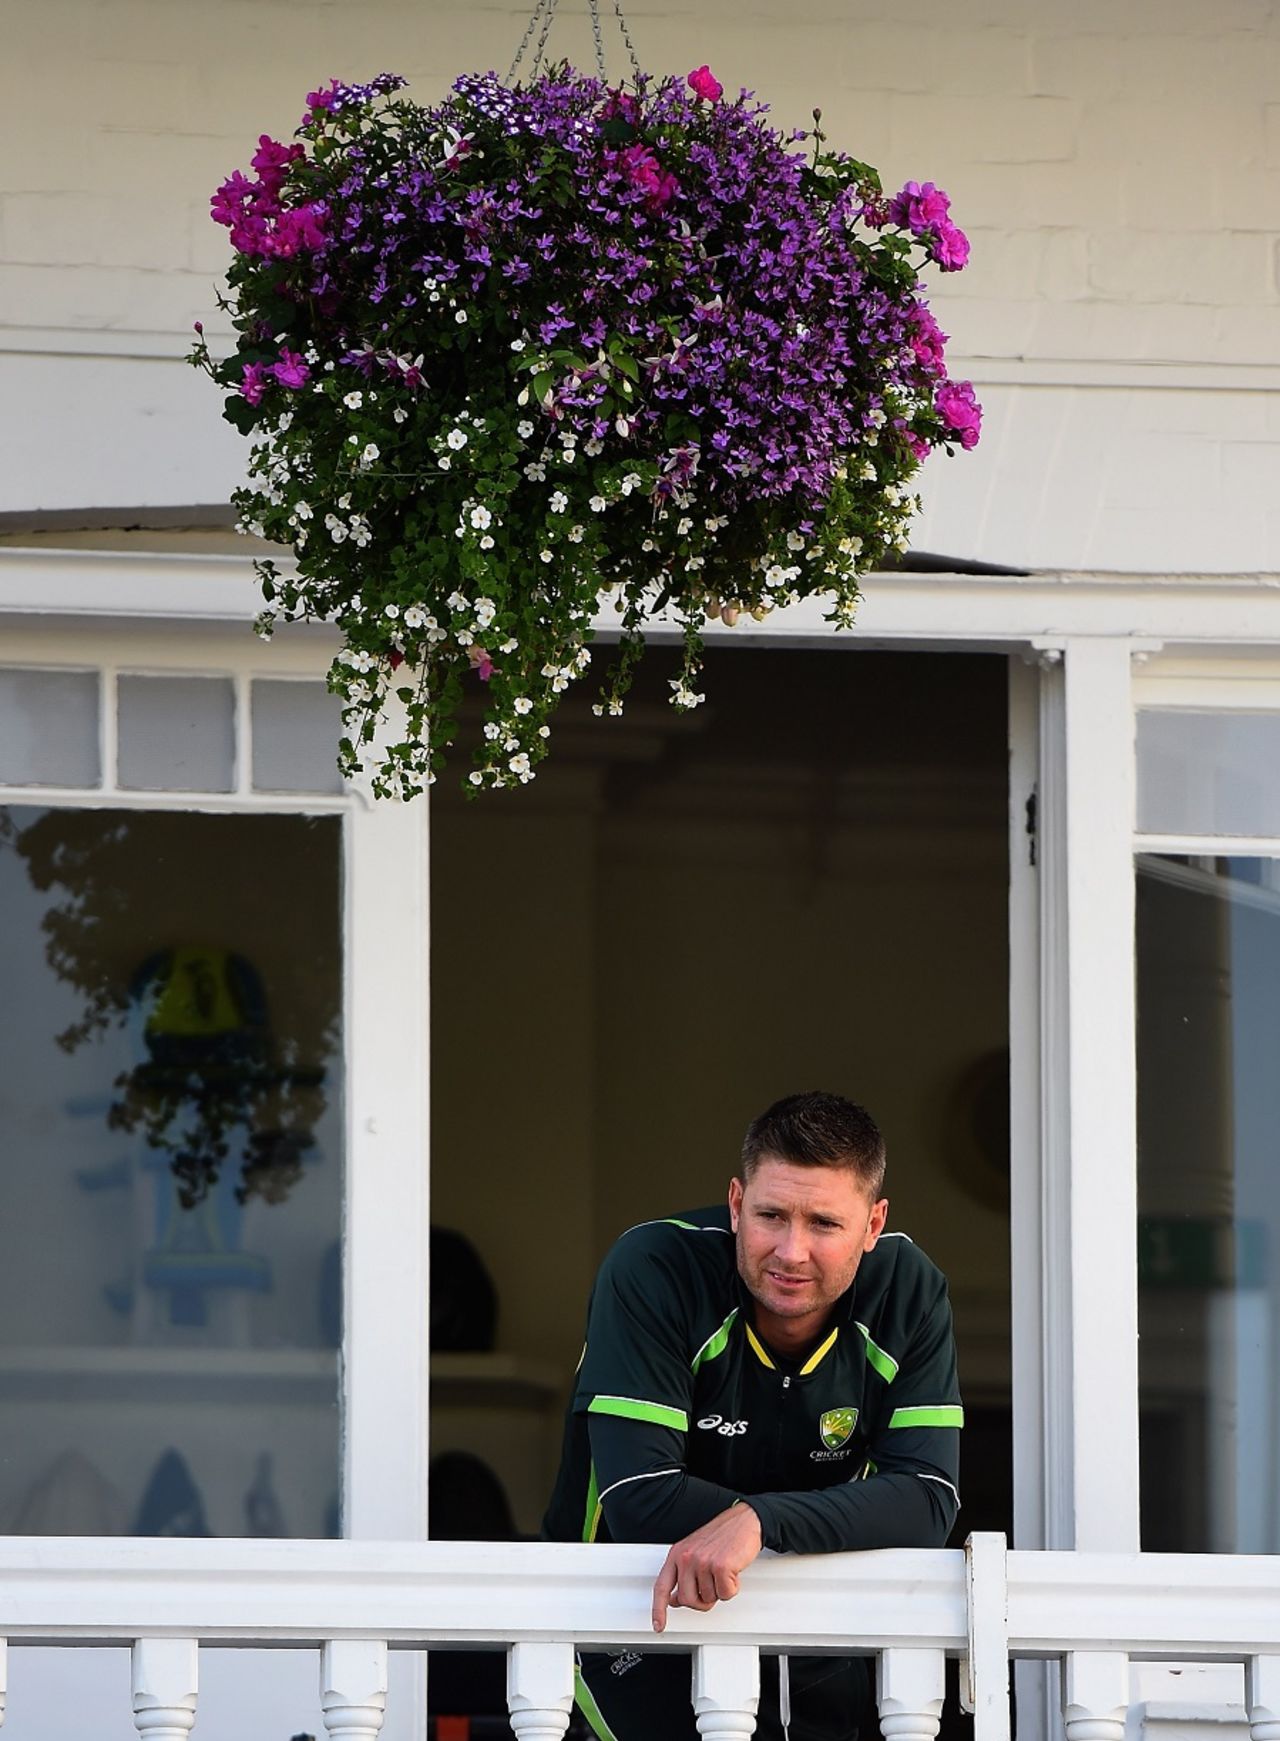 Michael Clarke is set to retire after the Ashes, England v Australia, 4th Investec Test, Trent Bridge, 3rd day, August 8, 2015